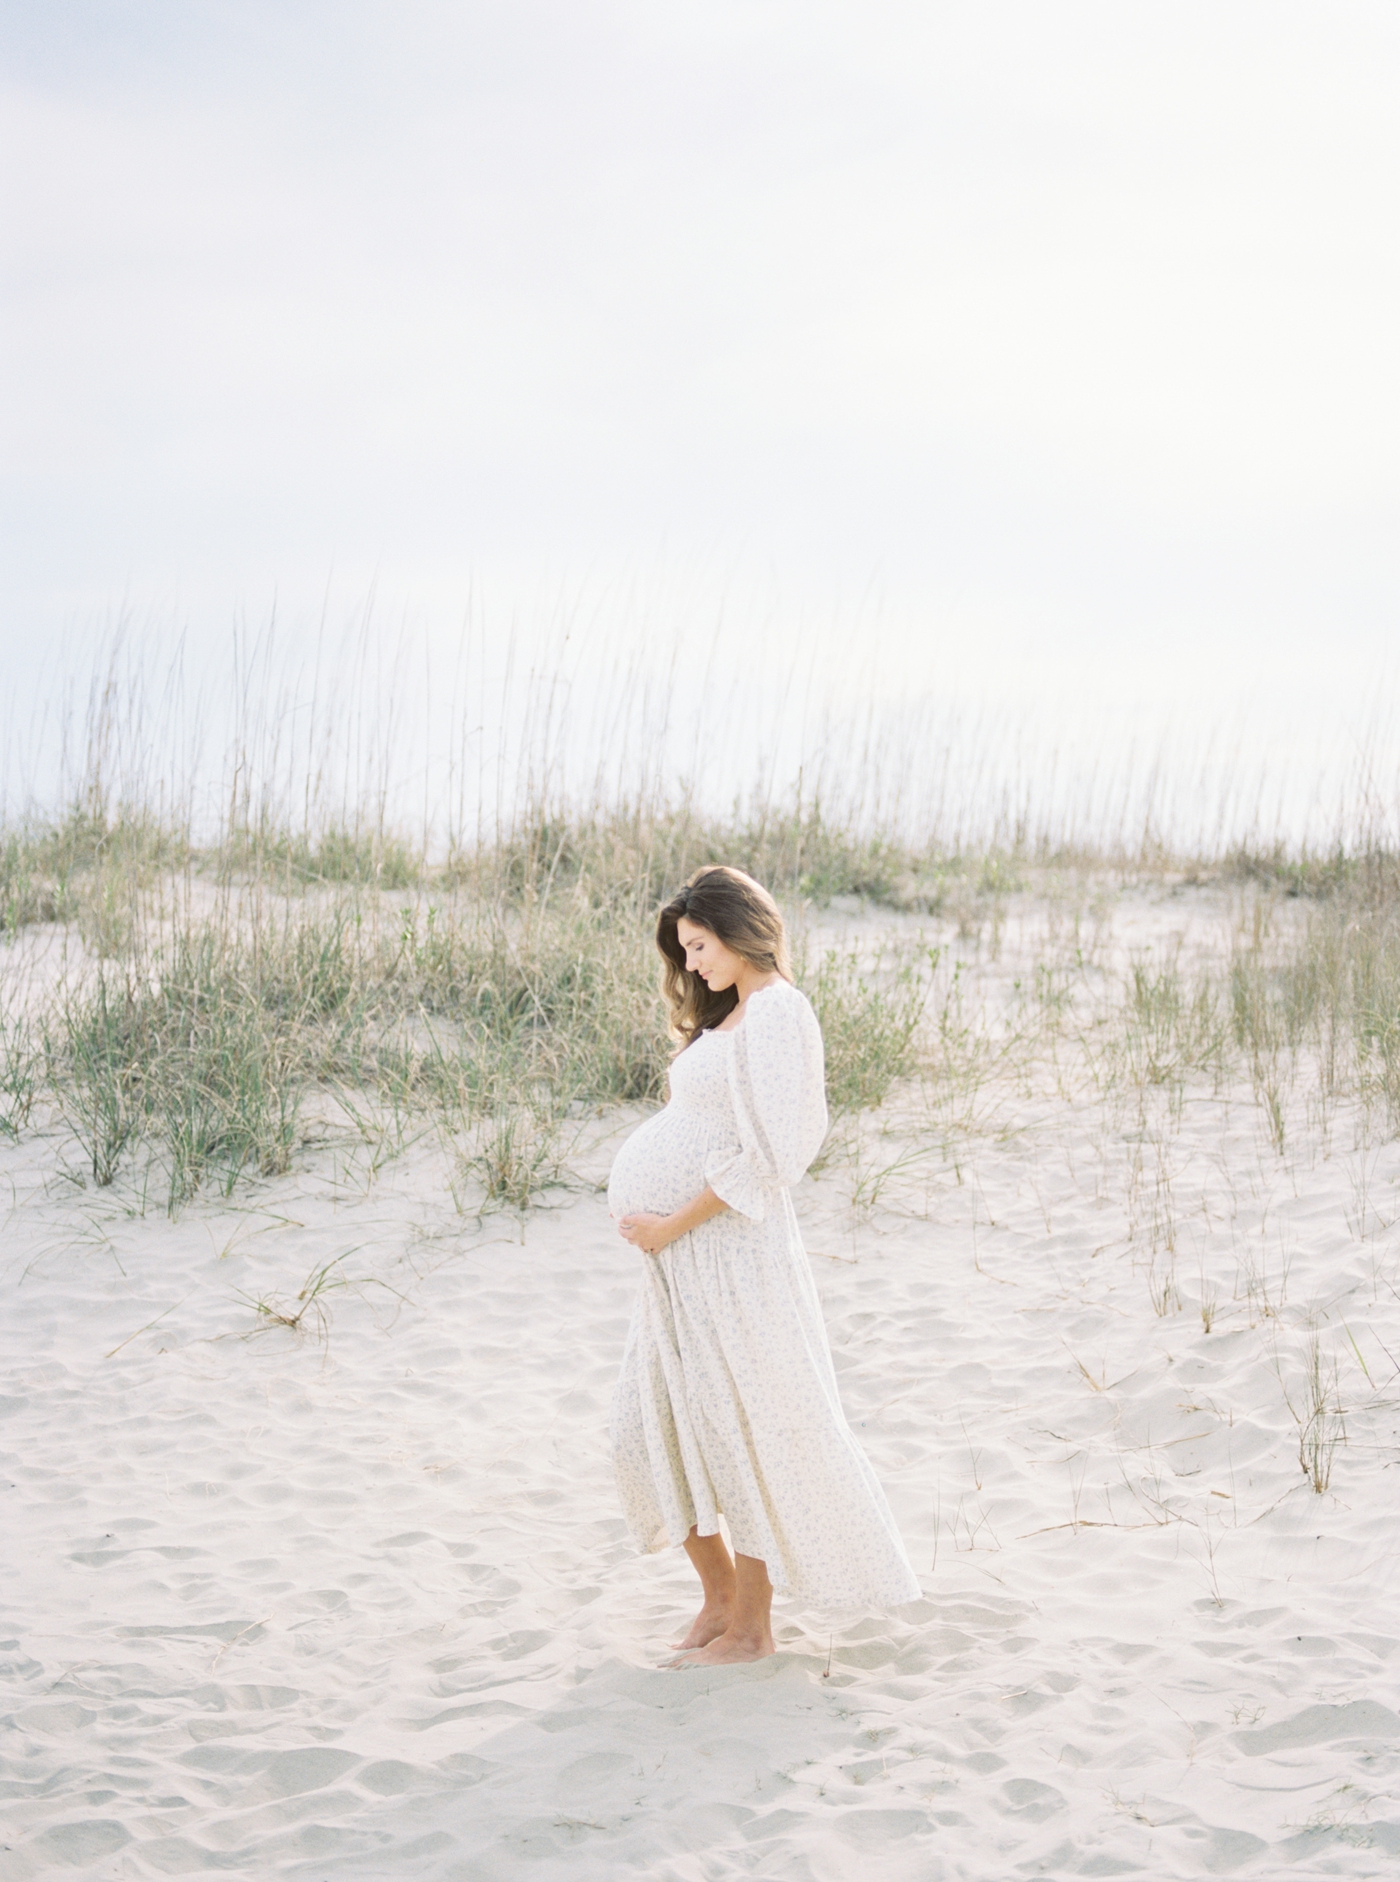 Mother to be on Sullivans Island cradling belly | Photo by Caitlyn Motycka Photography.